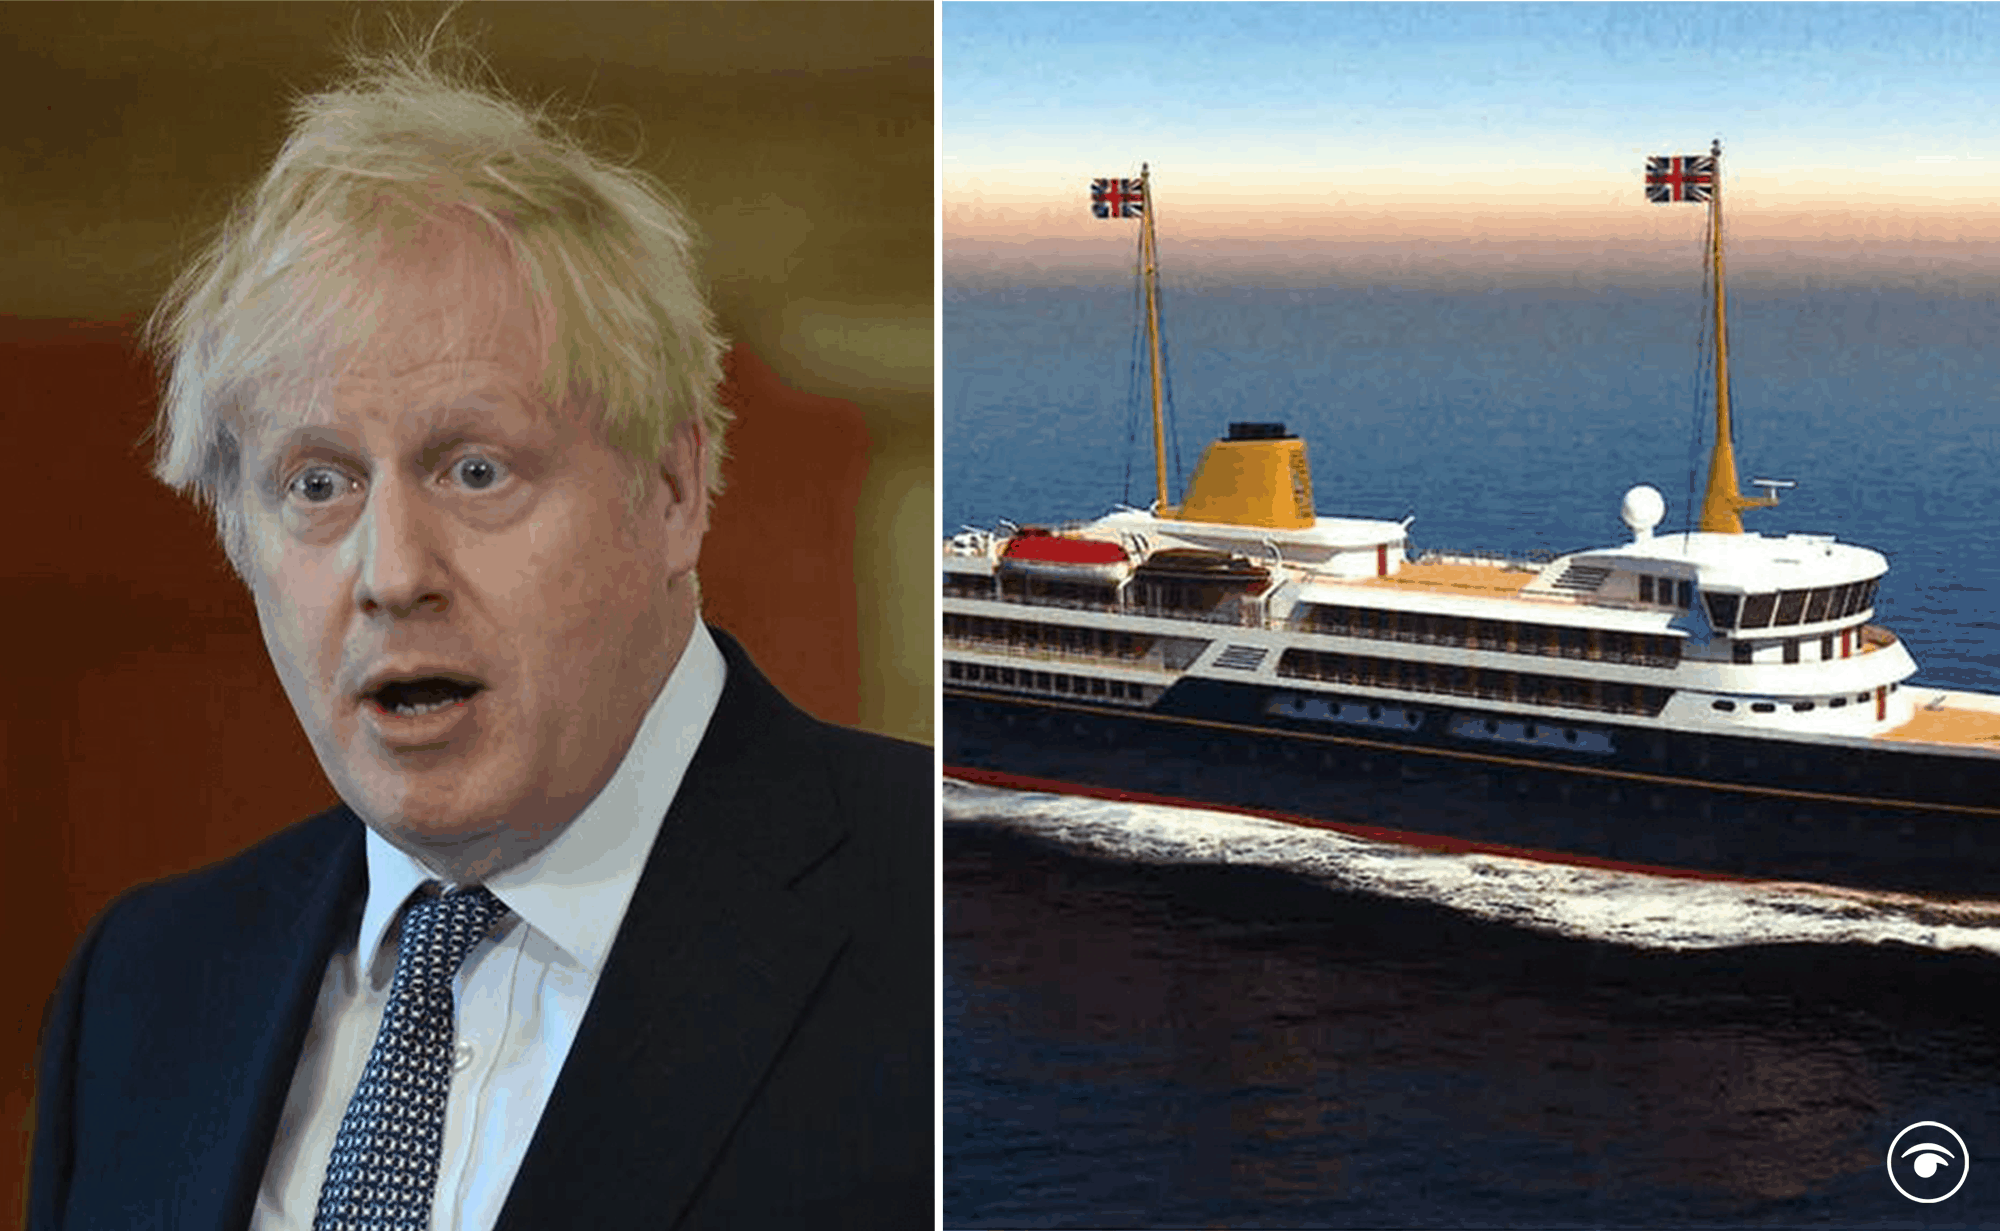 Johnson accused of ‘copper-bottomed, ocean-going incompetence’ as trade yacht flouts WTO rules